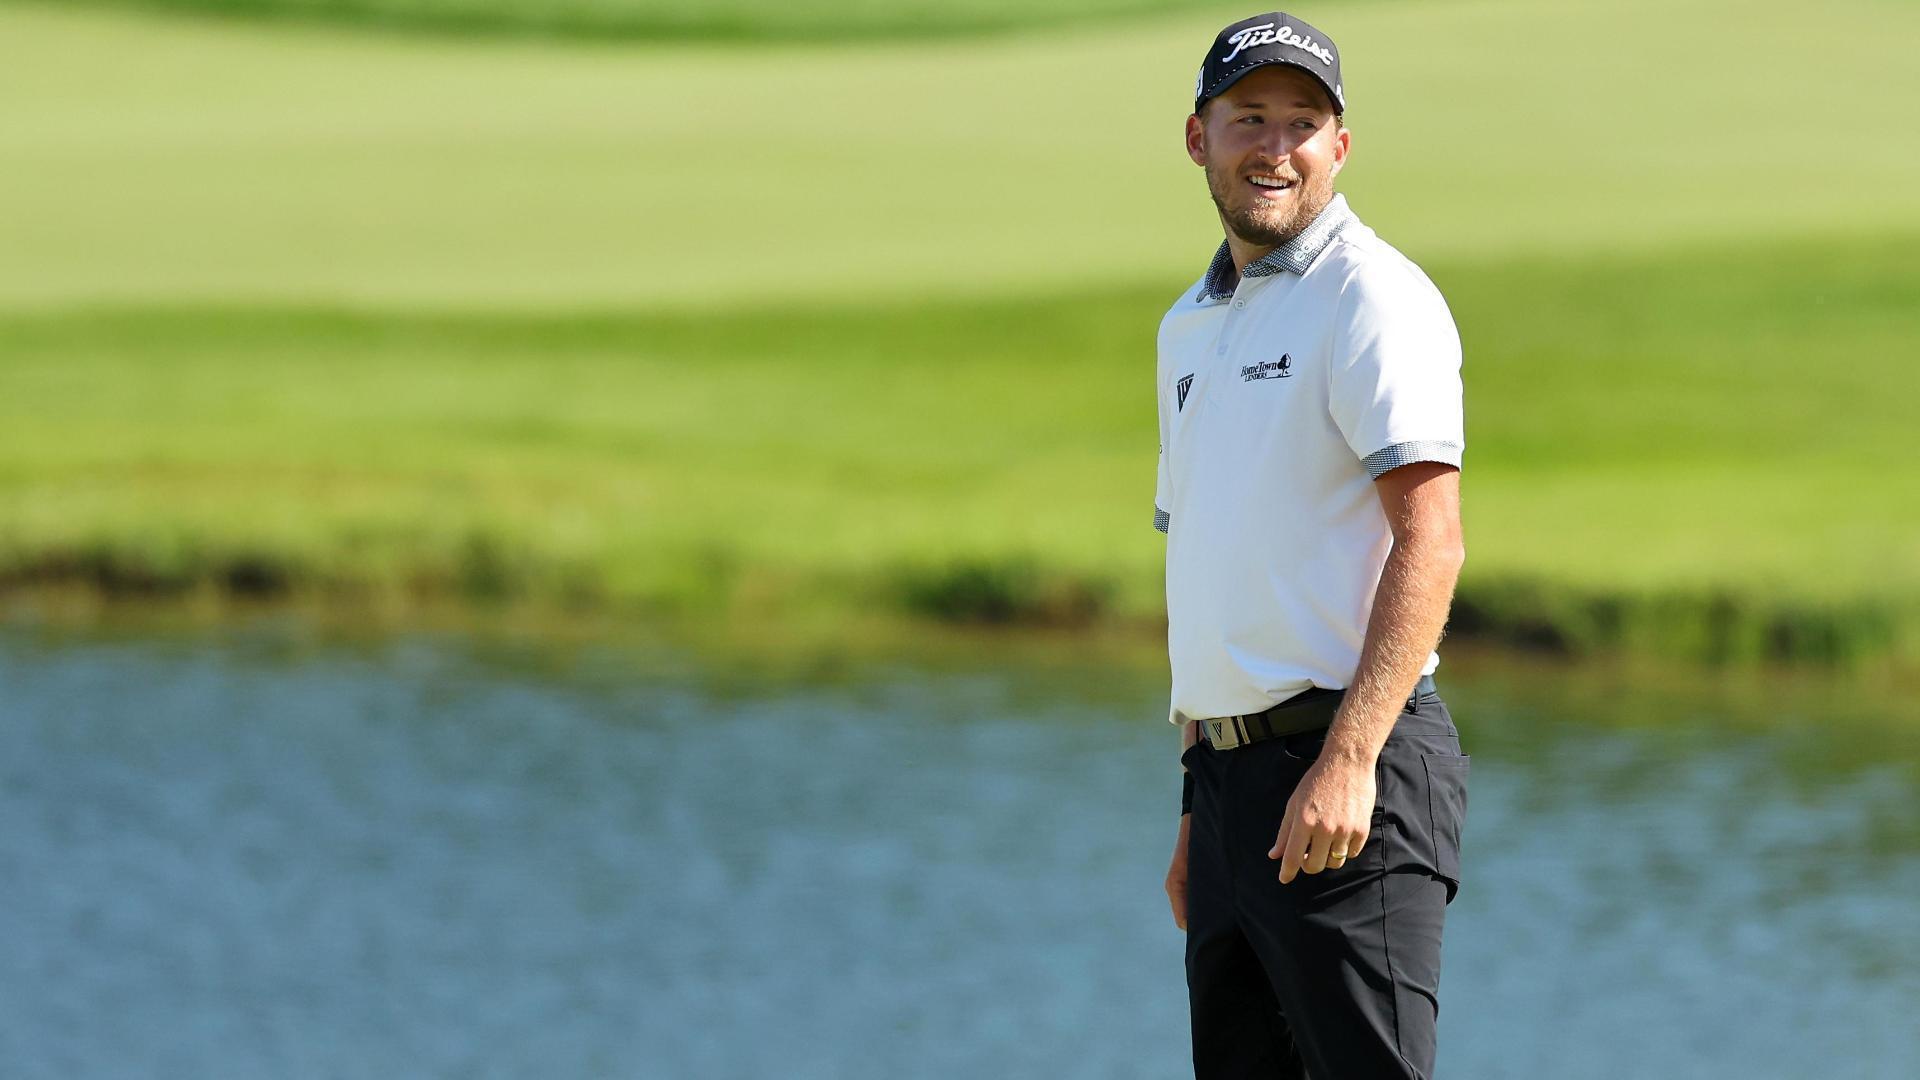 Lee Hodges earns first PGA win after gorgeous approach shot on 18 - Stream the Video